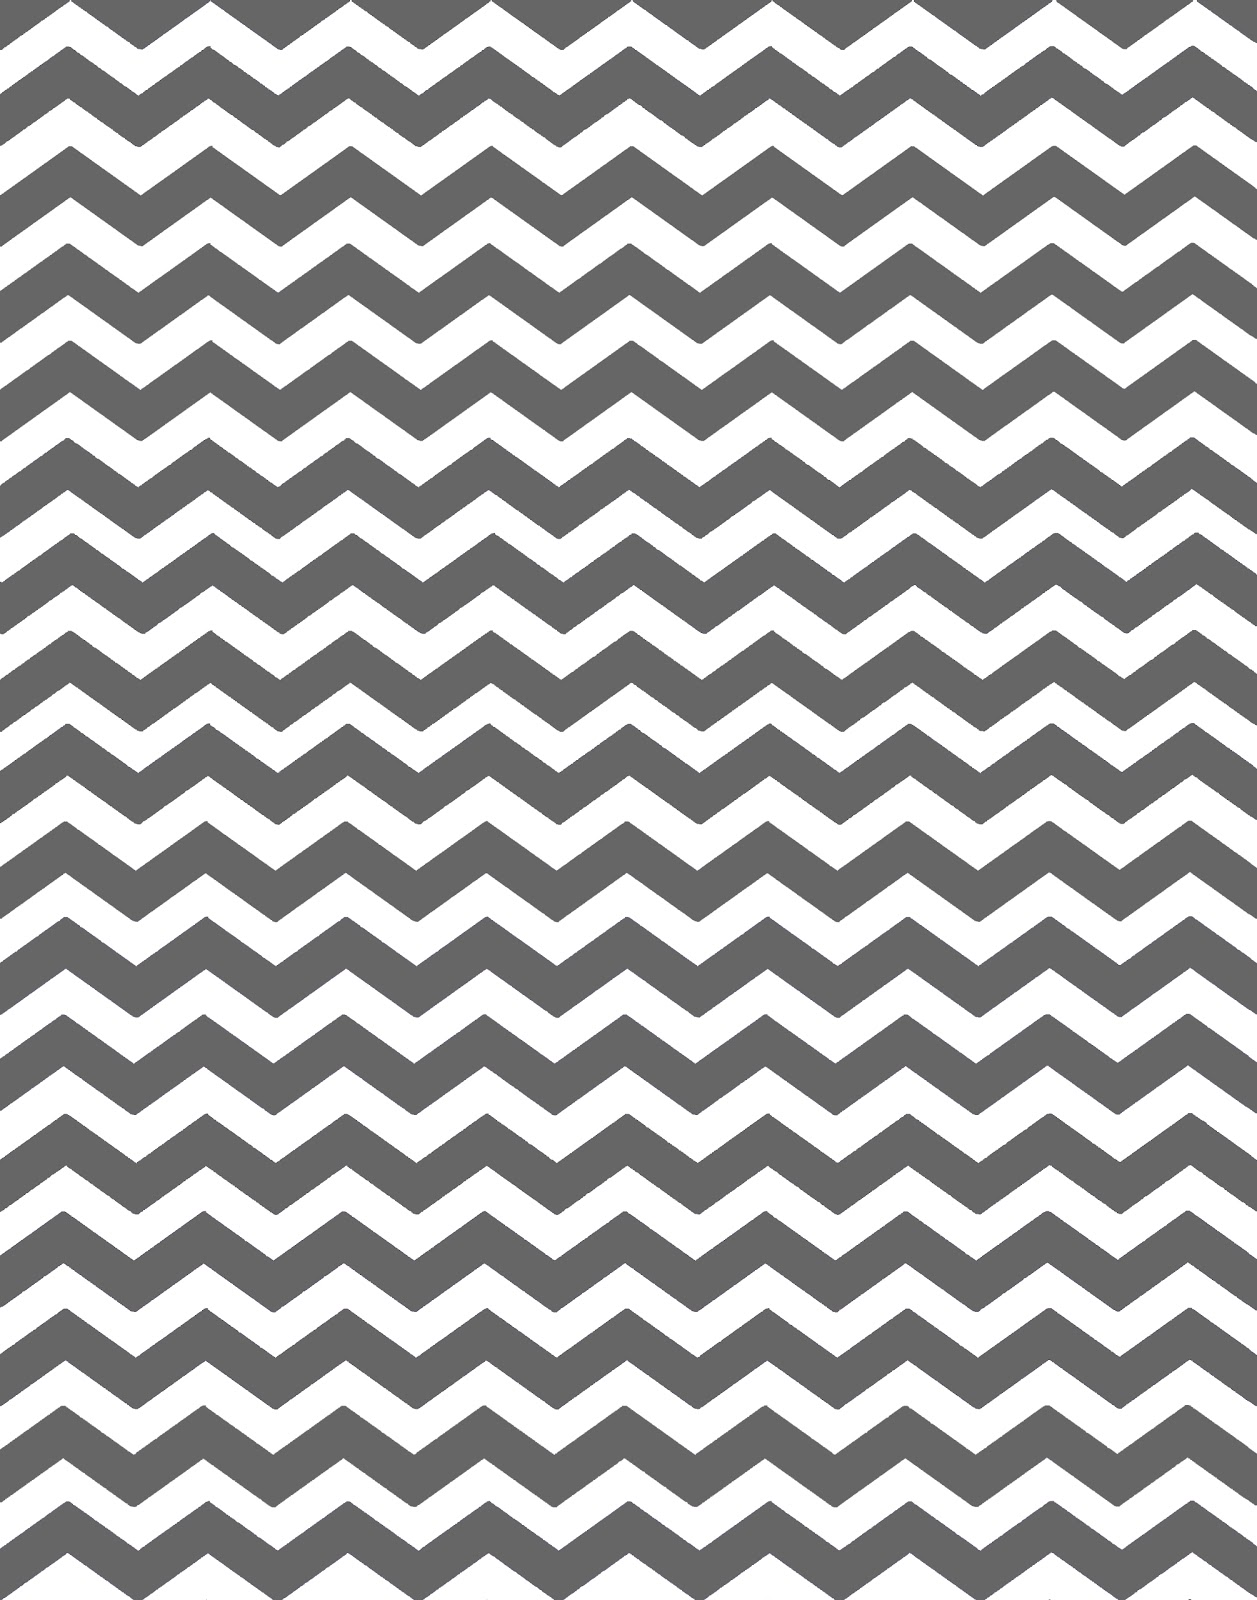 16 New Colors Chevron Background Patterns